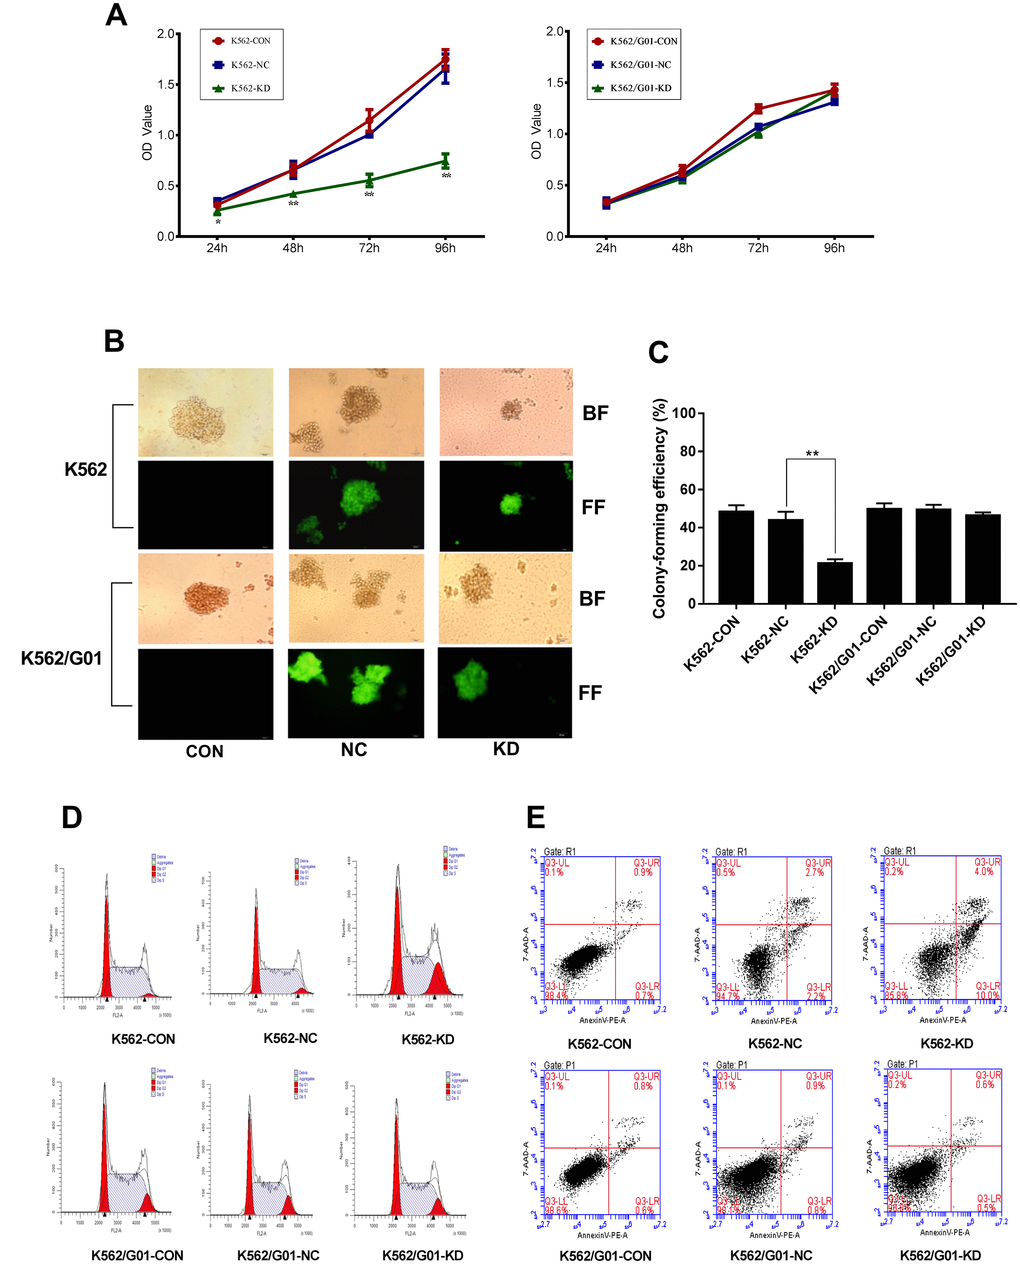 Effects of PRL-3-silencingon cell proliferation and apoptosis were evaluated in K562 and K562/G01 cells. (A) A cell growth curve was plotted based on the OD value (proportional to cell numbers) obtained at different time points following transfection. (B, C) Colonies containing ≥40 cells were counted on day 7 using a microscope (×200). (D) Cells were labeled by PI and analyzed using FCM. (E) Apoptotic cells were measured by FCM. Dot plots show 7-AAD (y-axis) vs. Annexin-V (x-axis). (*PPvs. NC group).